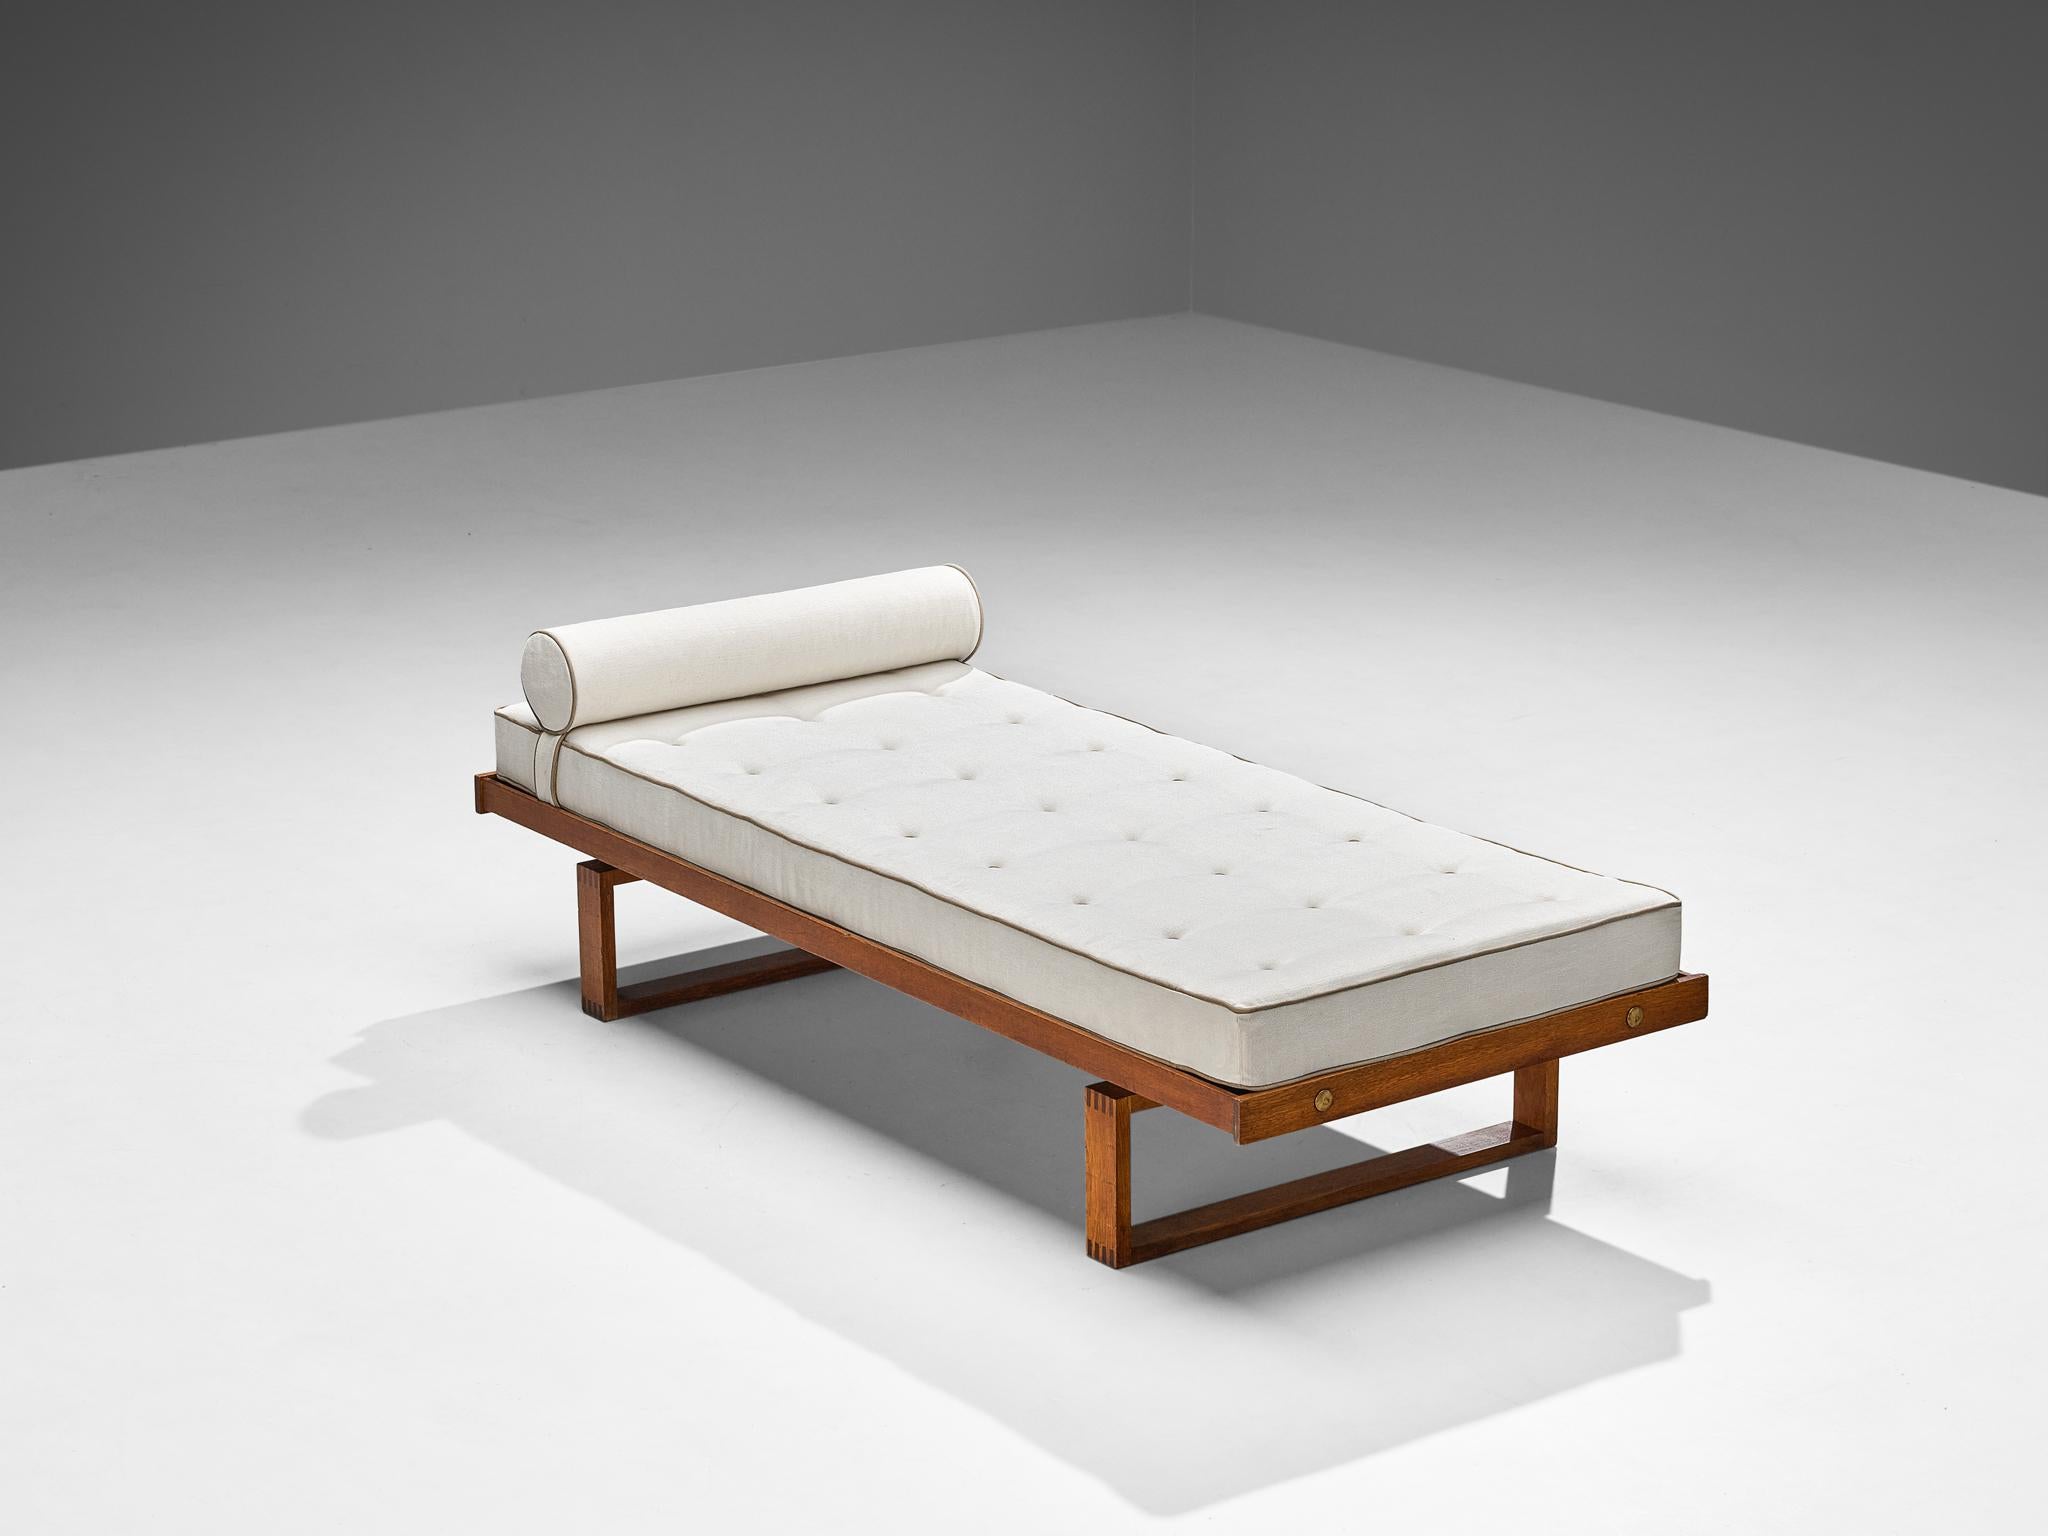 Børge Mogensen, daybed, teak, brass, Denmark, 1960s.

A simple and minimalist bed with fine wood joints designed by Danish furniture designer Børge Mogensen. The construction of this teak daybed is based on clean lines and angular shapes. Its simple